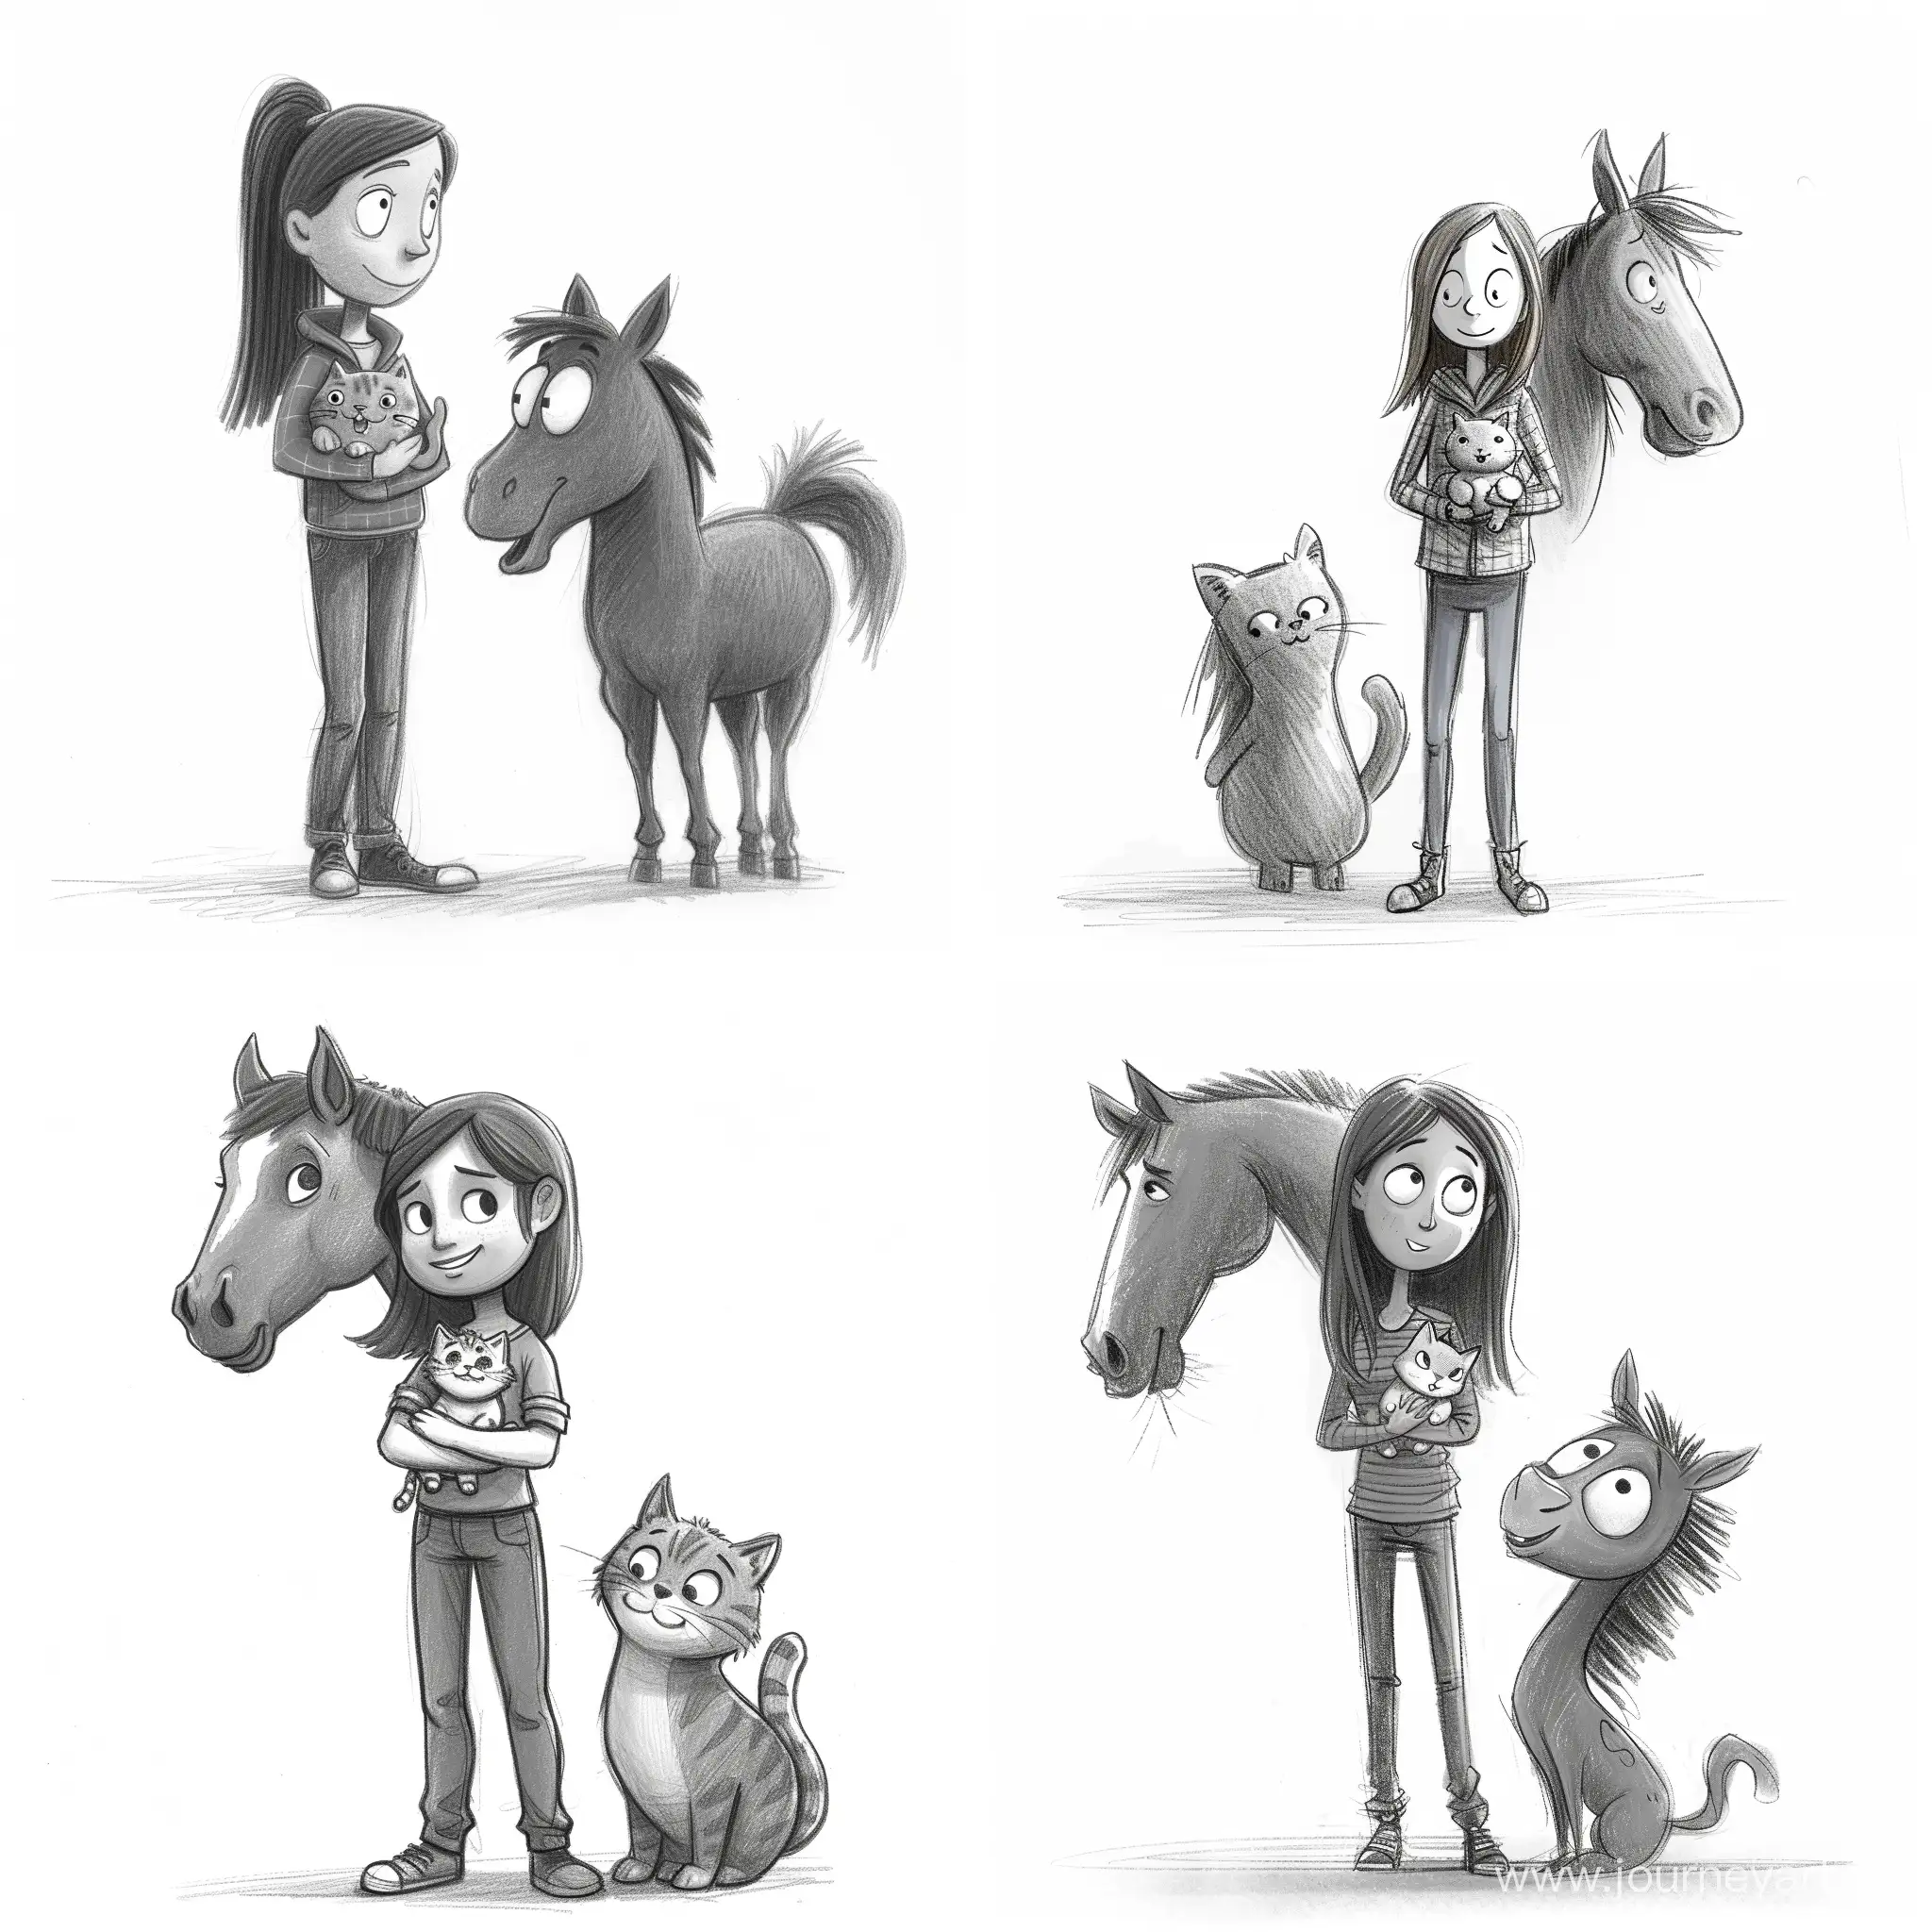 Illustration, a simple, cute, grayscale, pencil cartoon . Young woman stands (holding a happy cat). A horse looks over her shoulder amused. Illustration for a children’s book, whimsical , basic, adorable, line, drawing, some shading, pencil texture plain white background